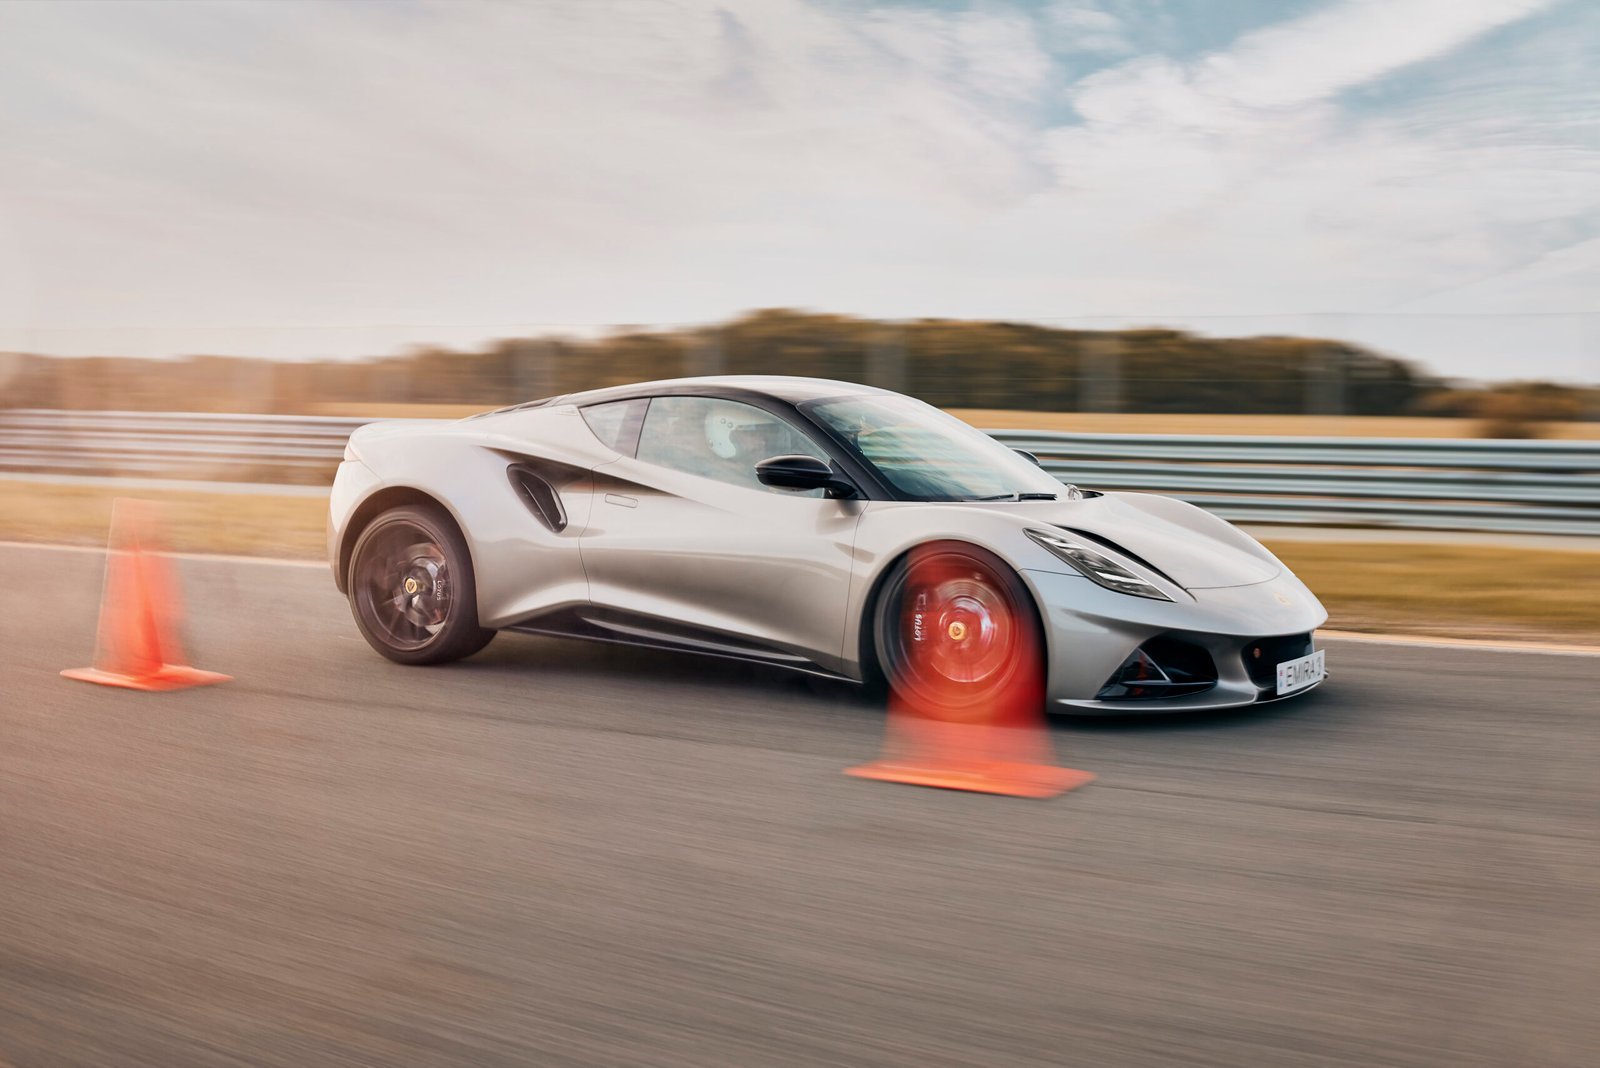 THE PERFECT CHRISTMAS GIFT LOTUS DRIVING ACADEMY ANNOUNCES 2023 DATES